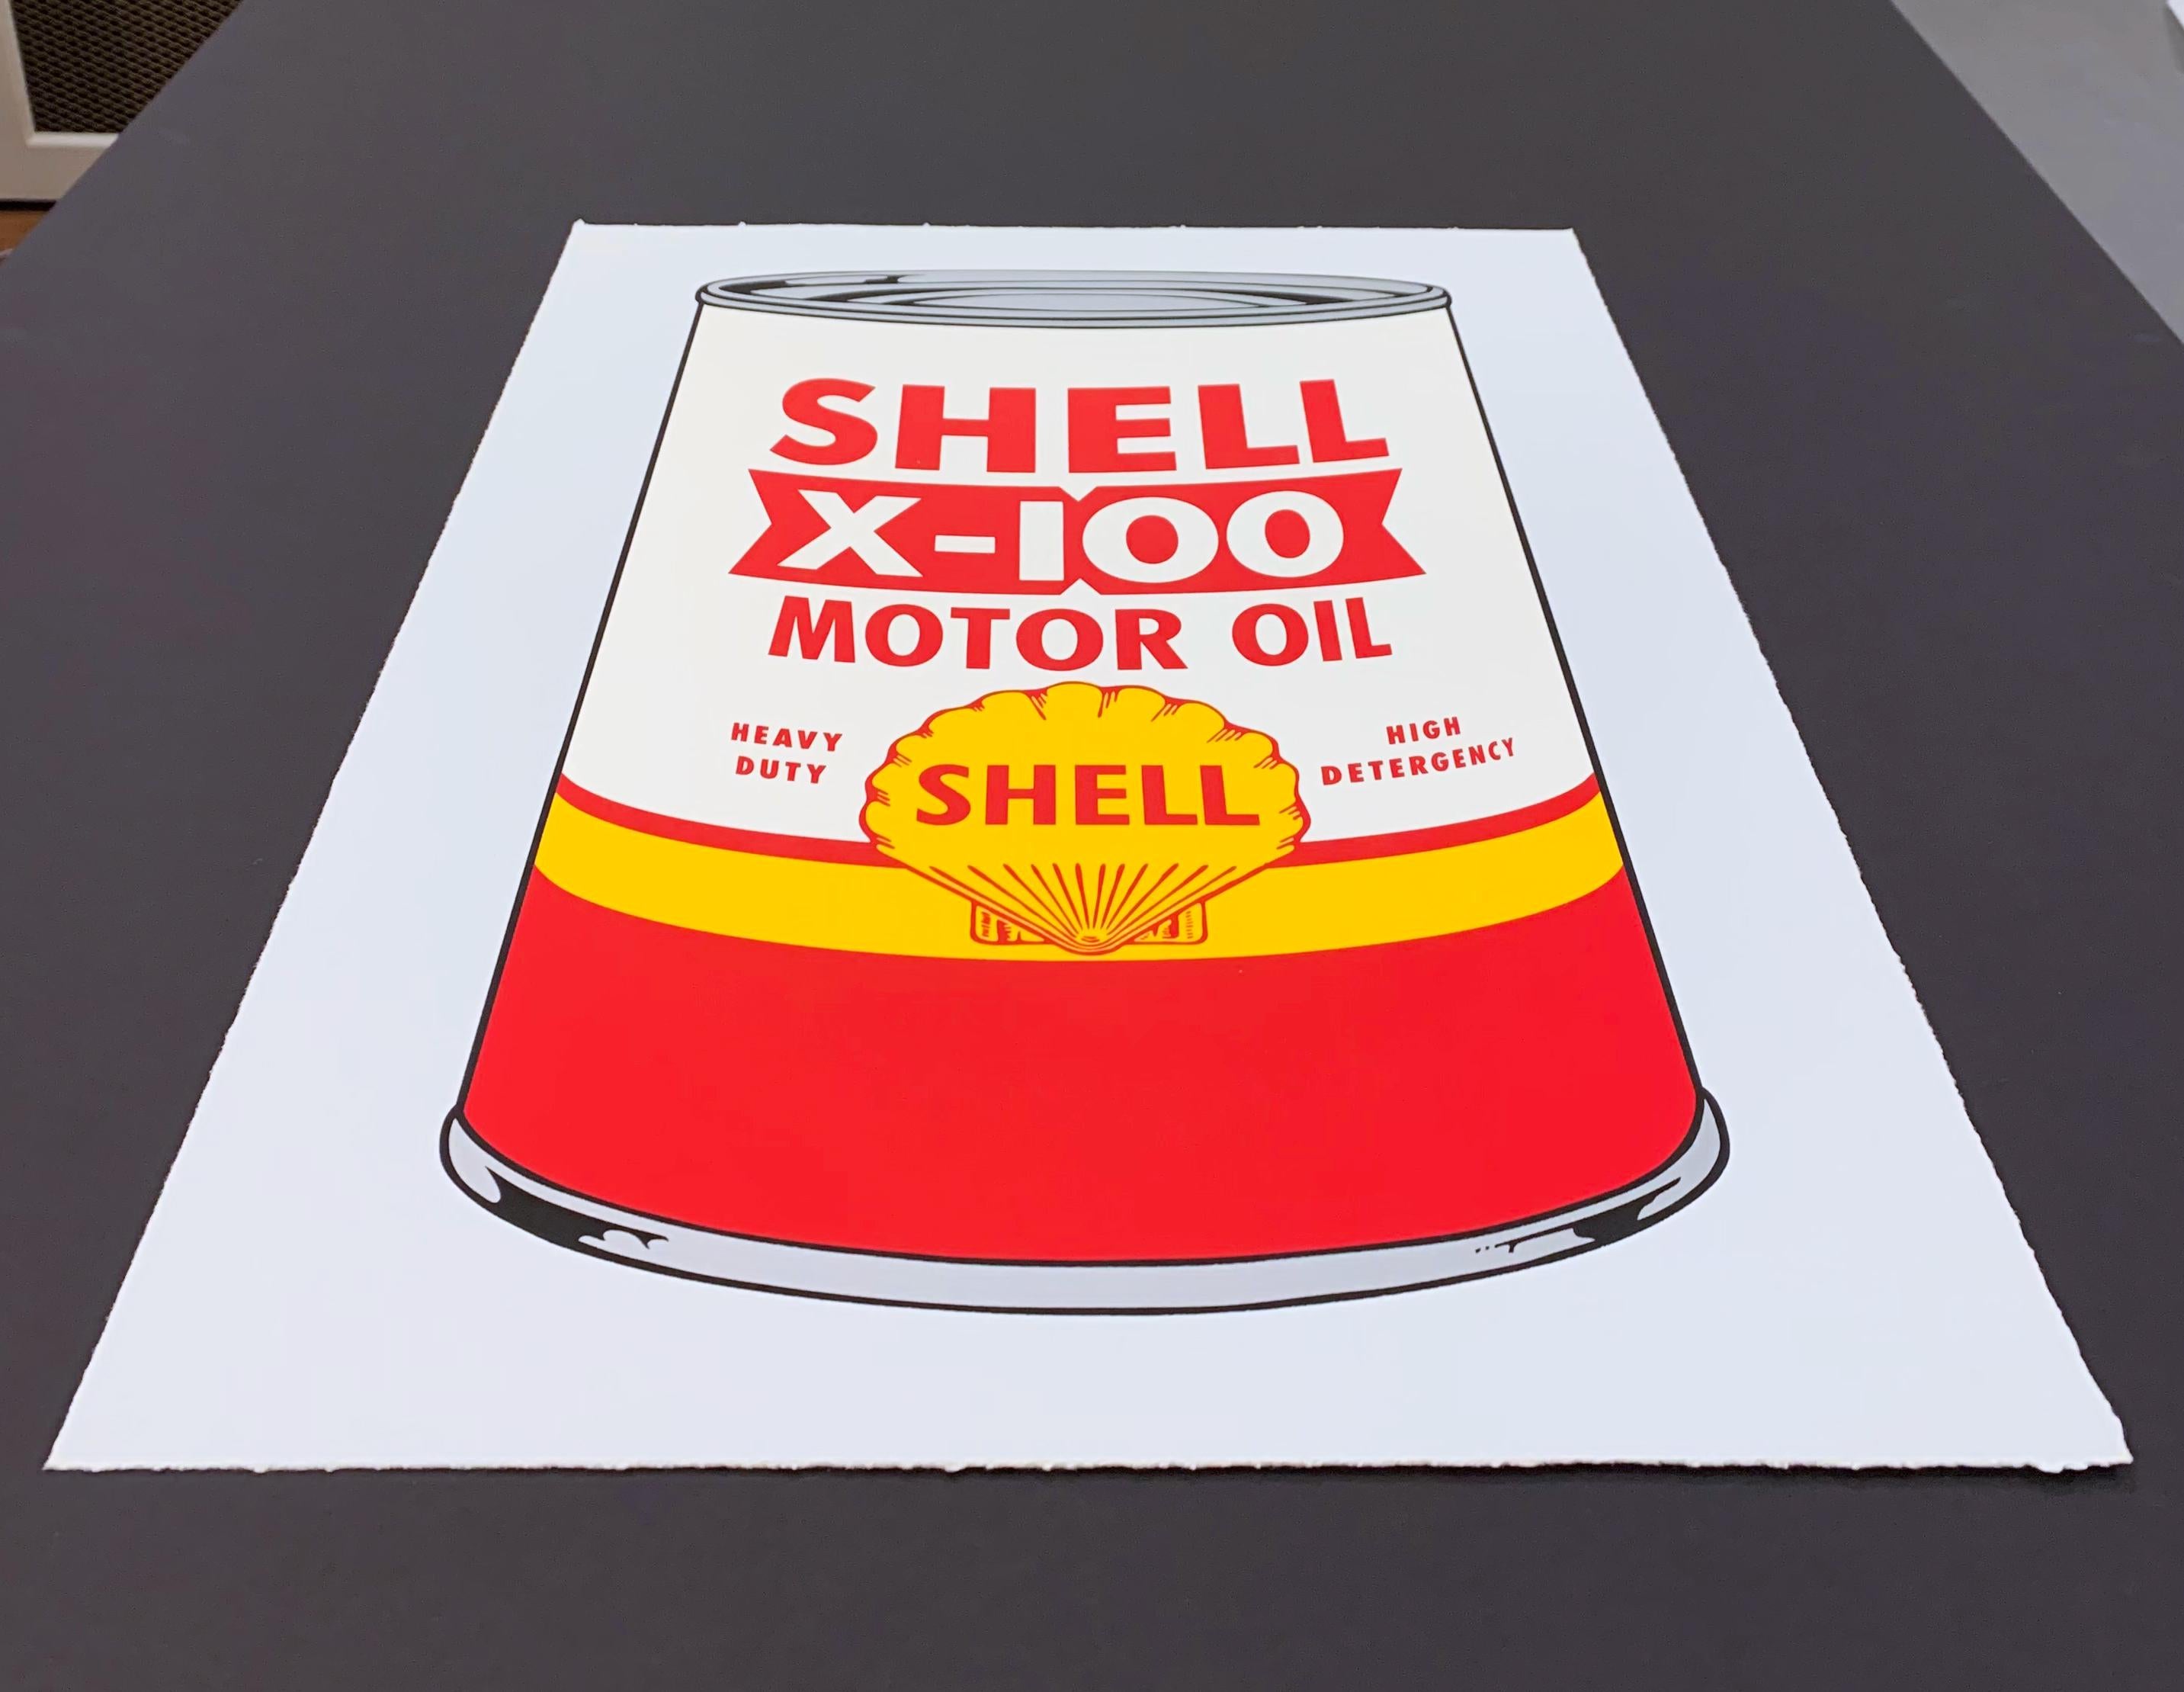 Artist: Heiner Meyer
Medium: Screenprint (multi-colored) on handmade paper
Title: Shell
Portfolio: Masterpieces in Oils
Signed: Hand signed and numbered on reverse
Year: 2016
Edition: 45/60
Framed Size: 32 3/4